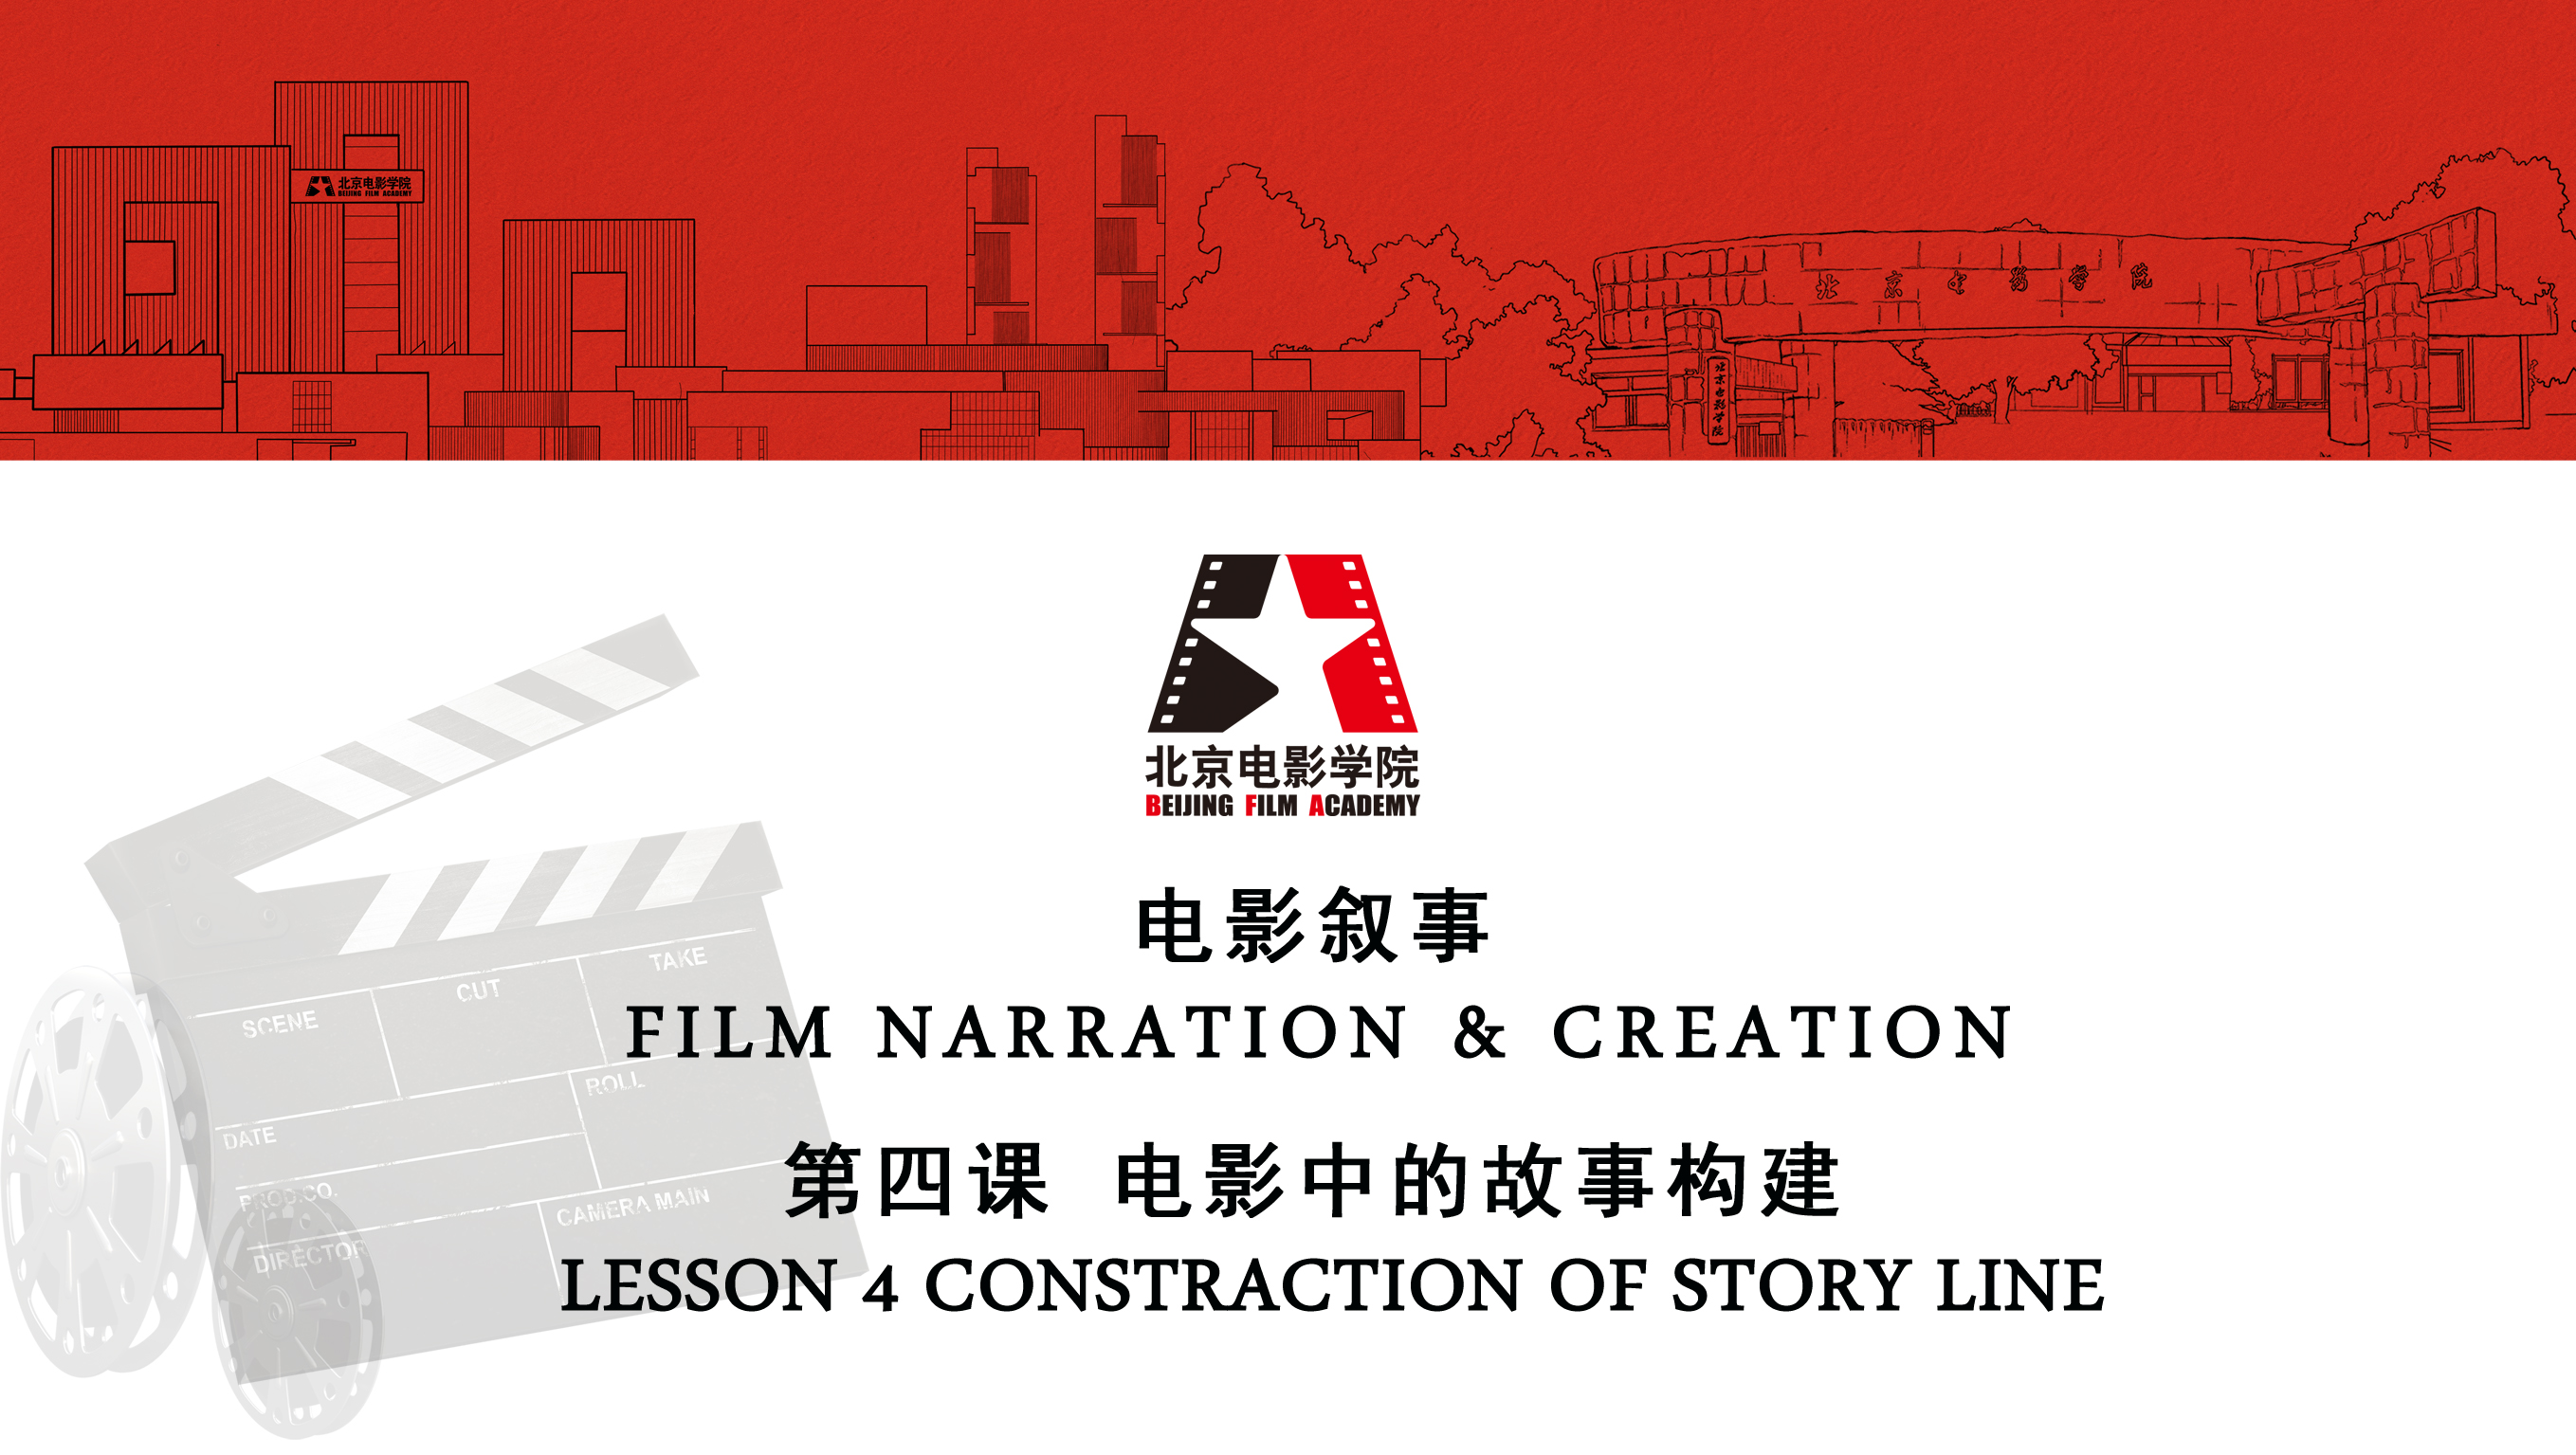 FILM NARRATION & CREATION LESSON 4 CONSTRACTION OF STORY LINE